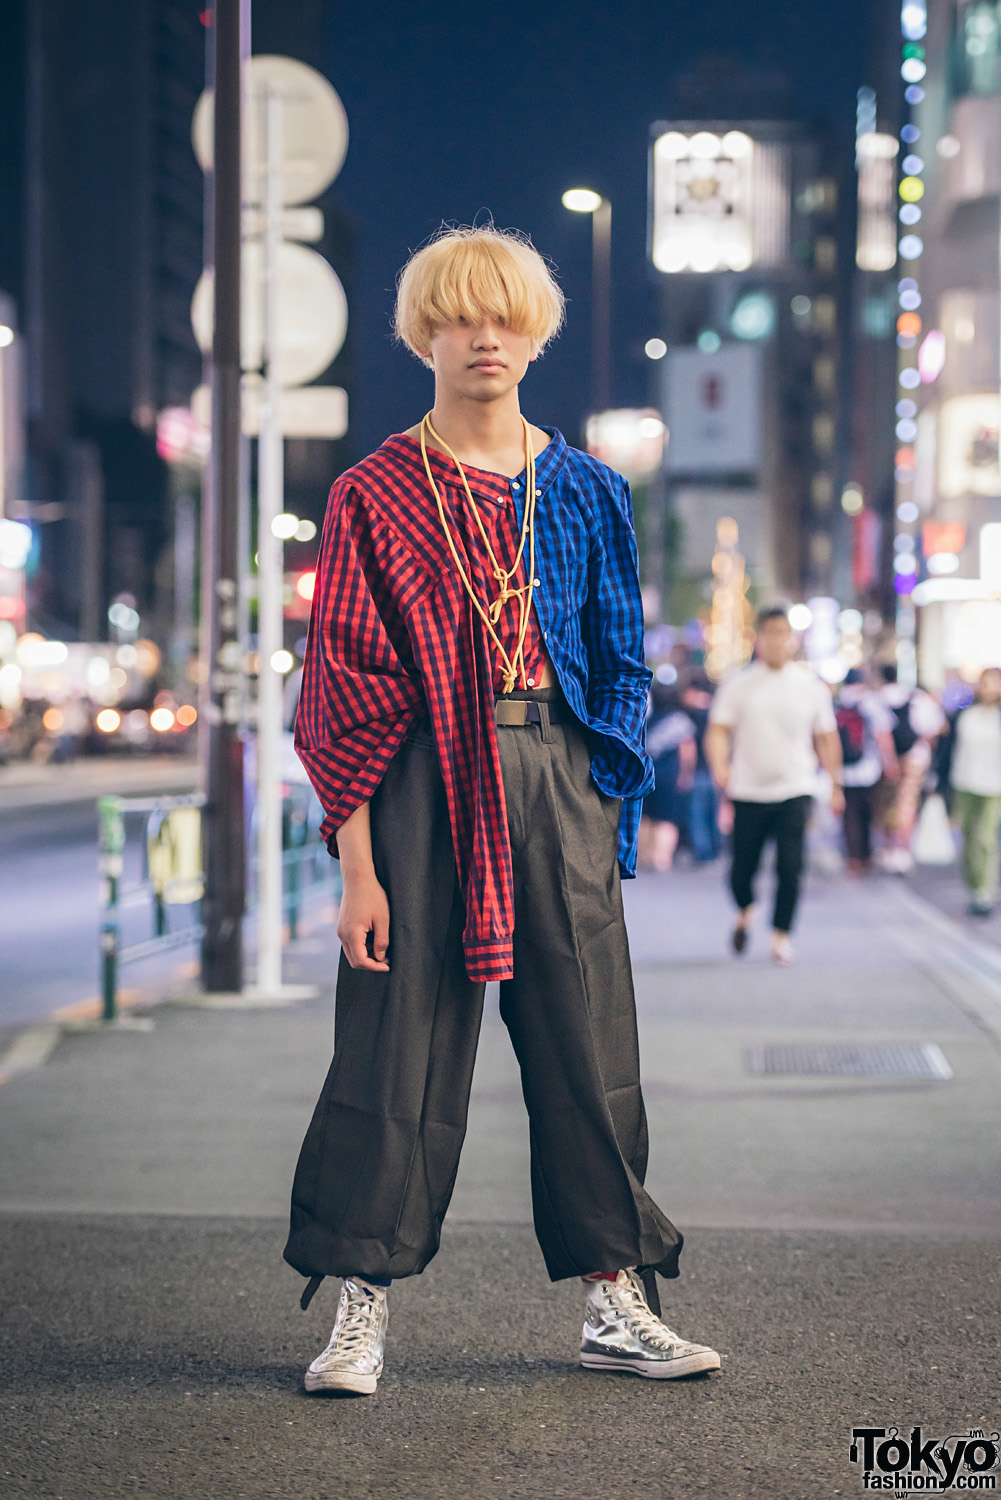 Oversized NFL Jersey, Plaid & Spike Necklace in Harajuku – Tokyo